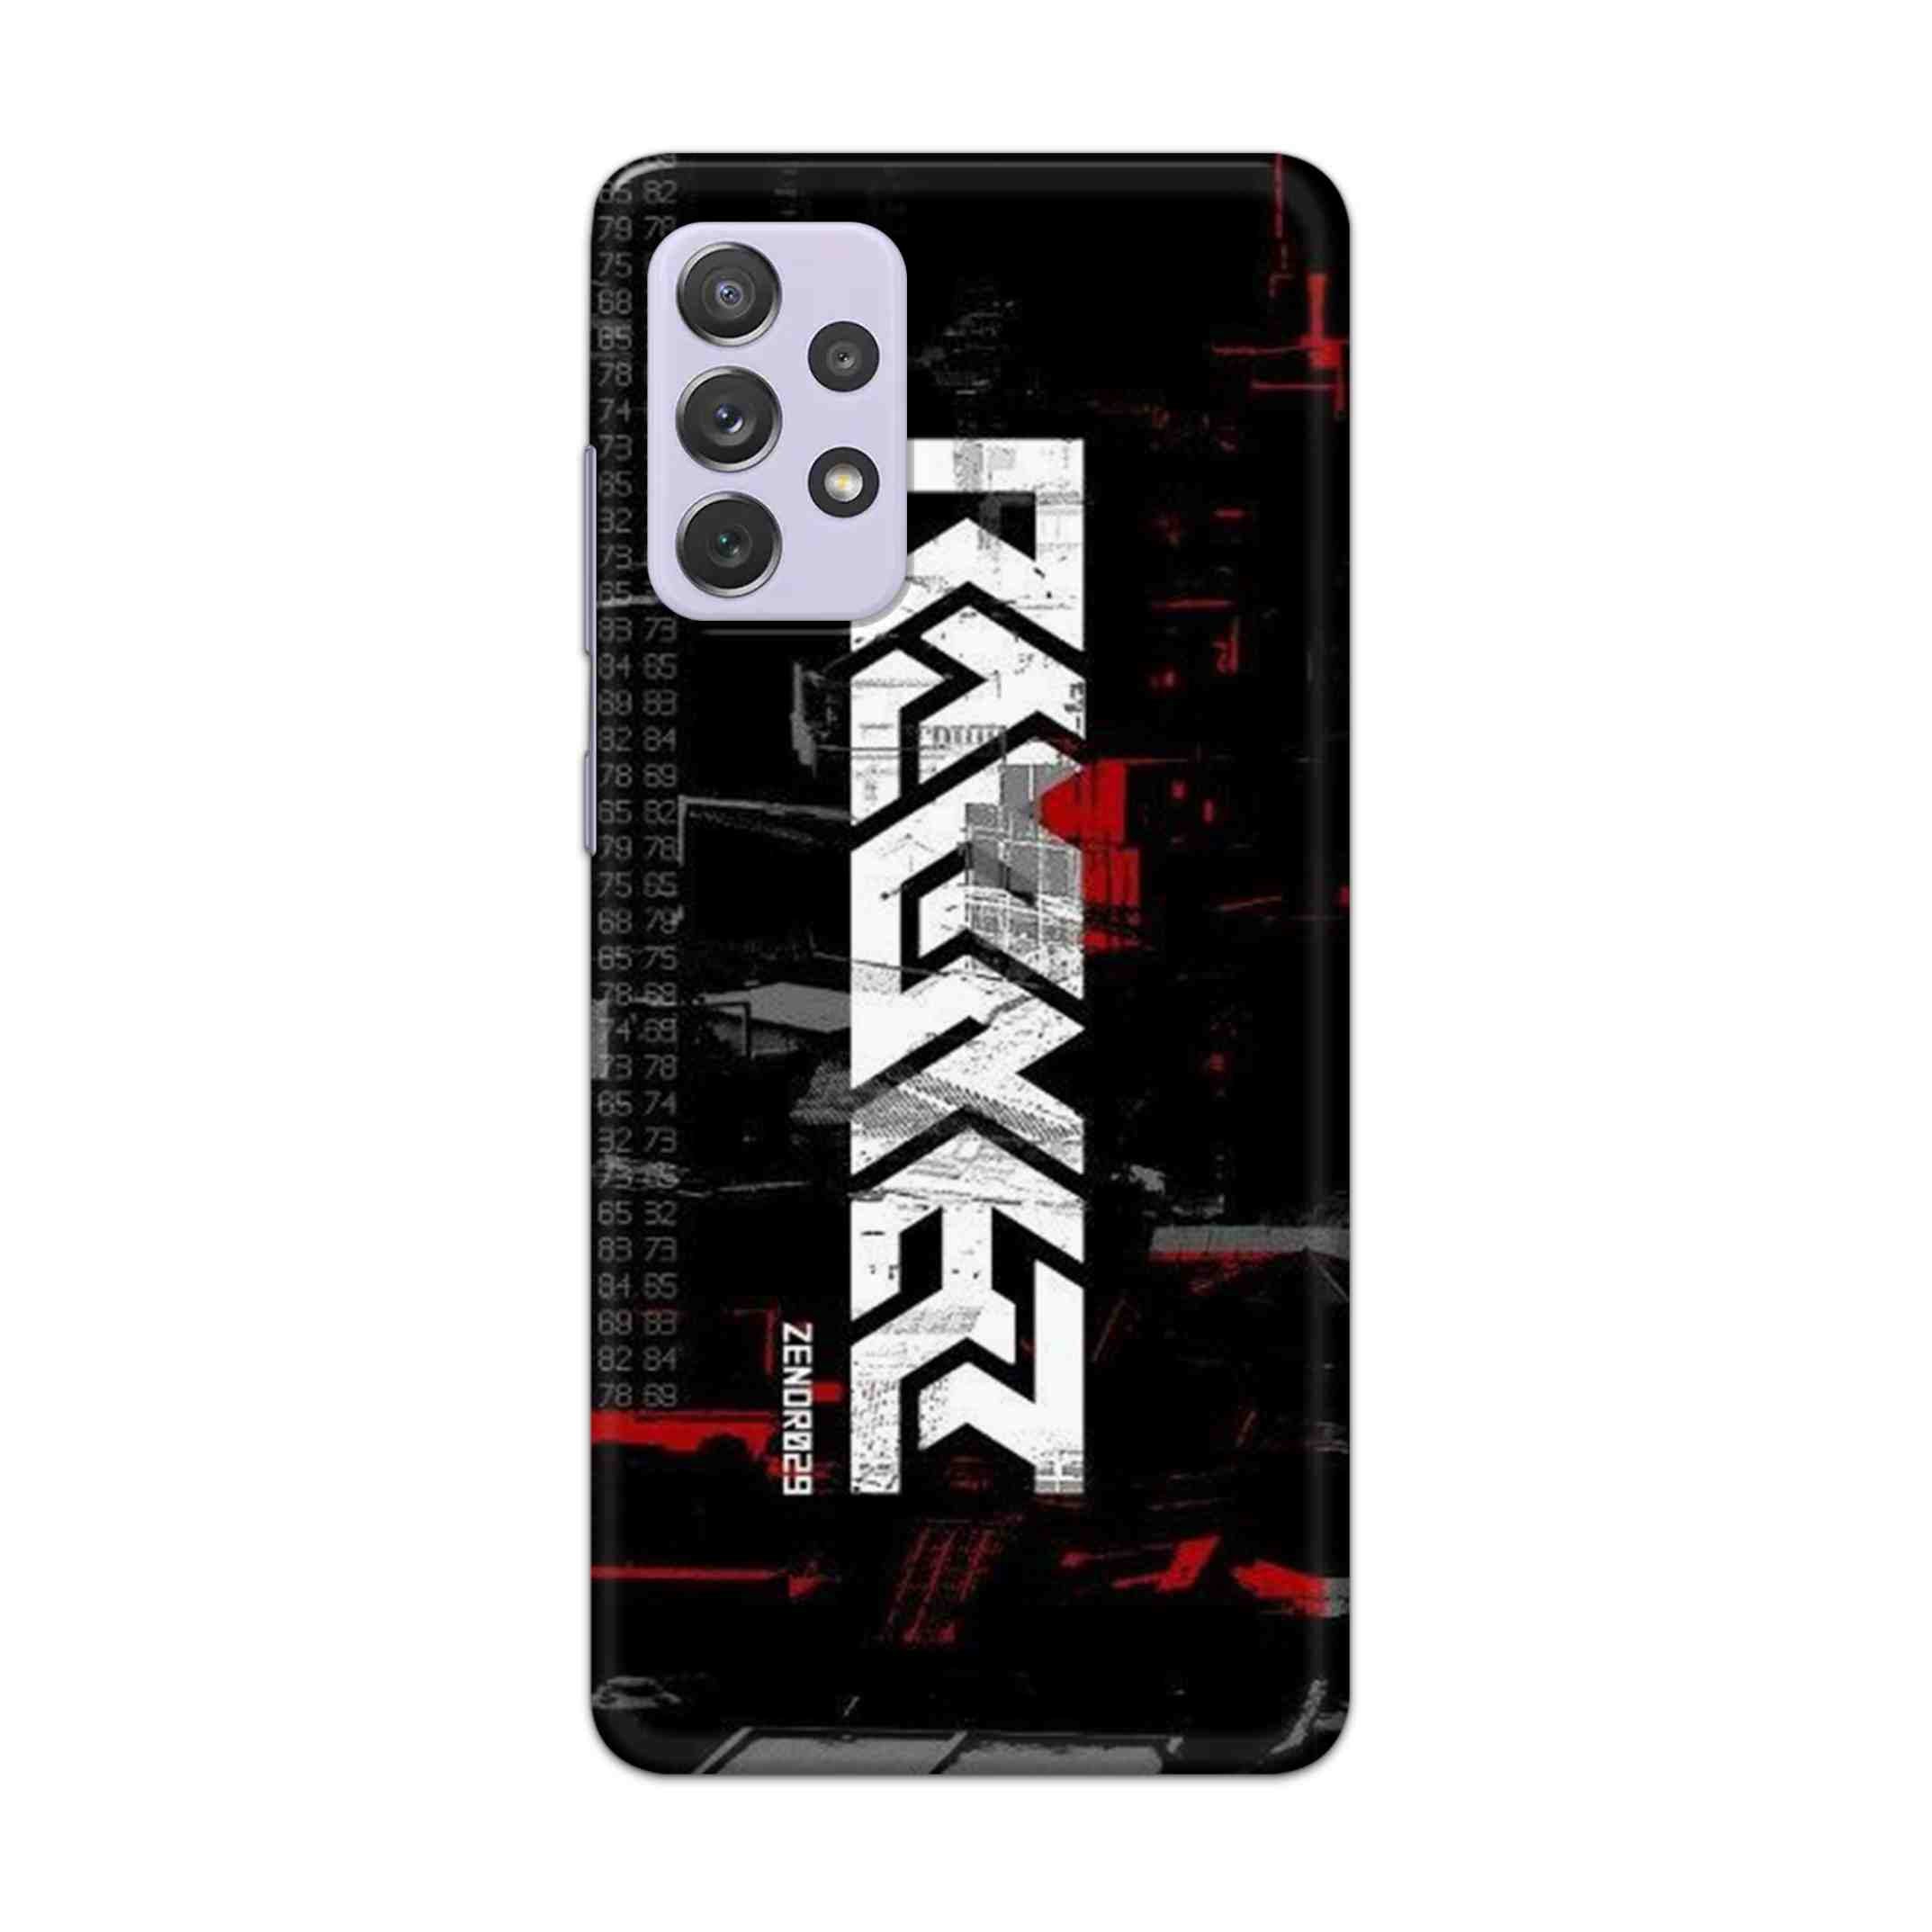 Buy Raxer Hard Back Mobile Phone Case Cover For Samsung Galaxy A72 Online